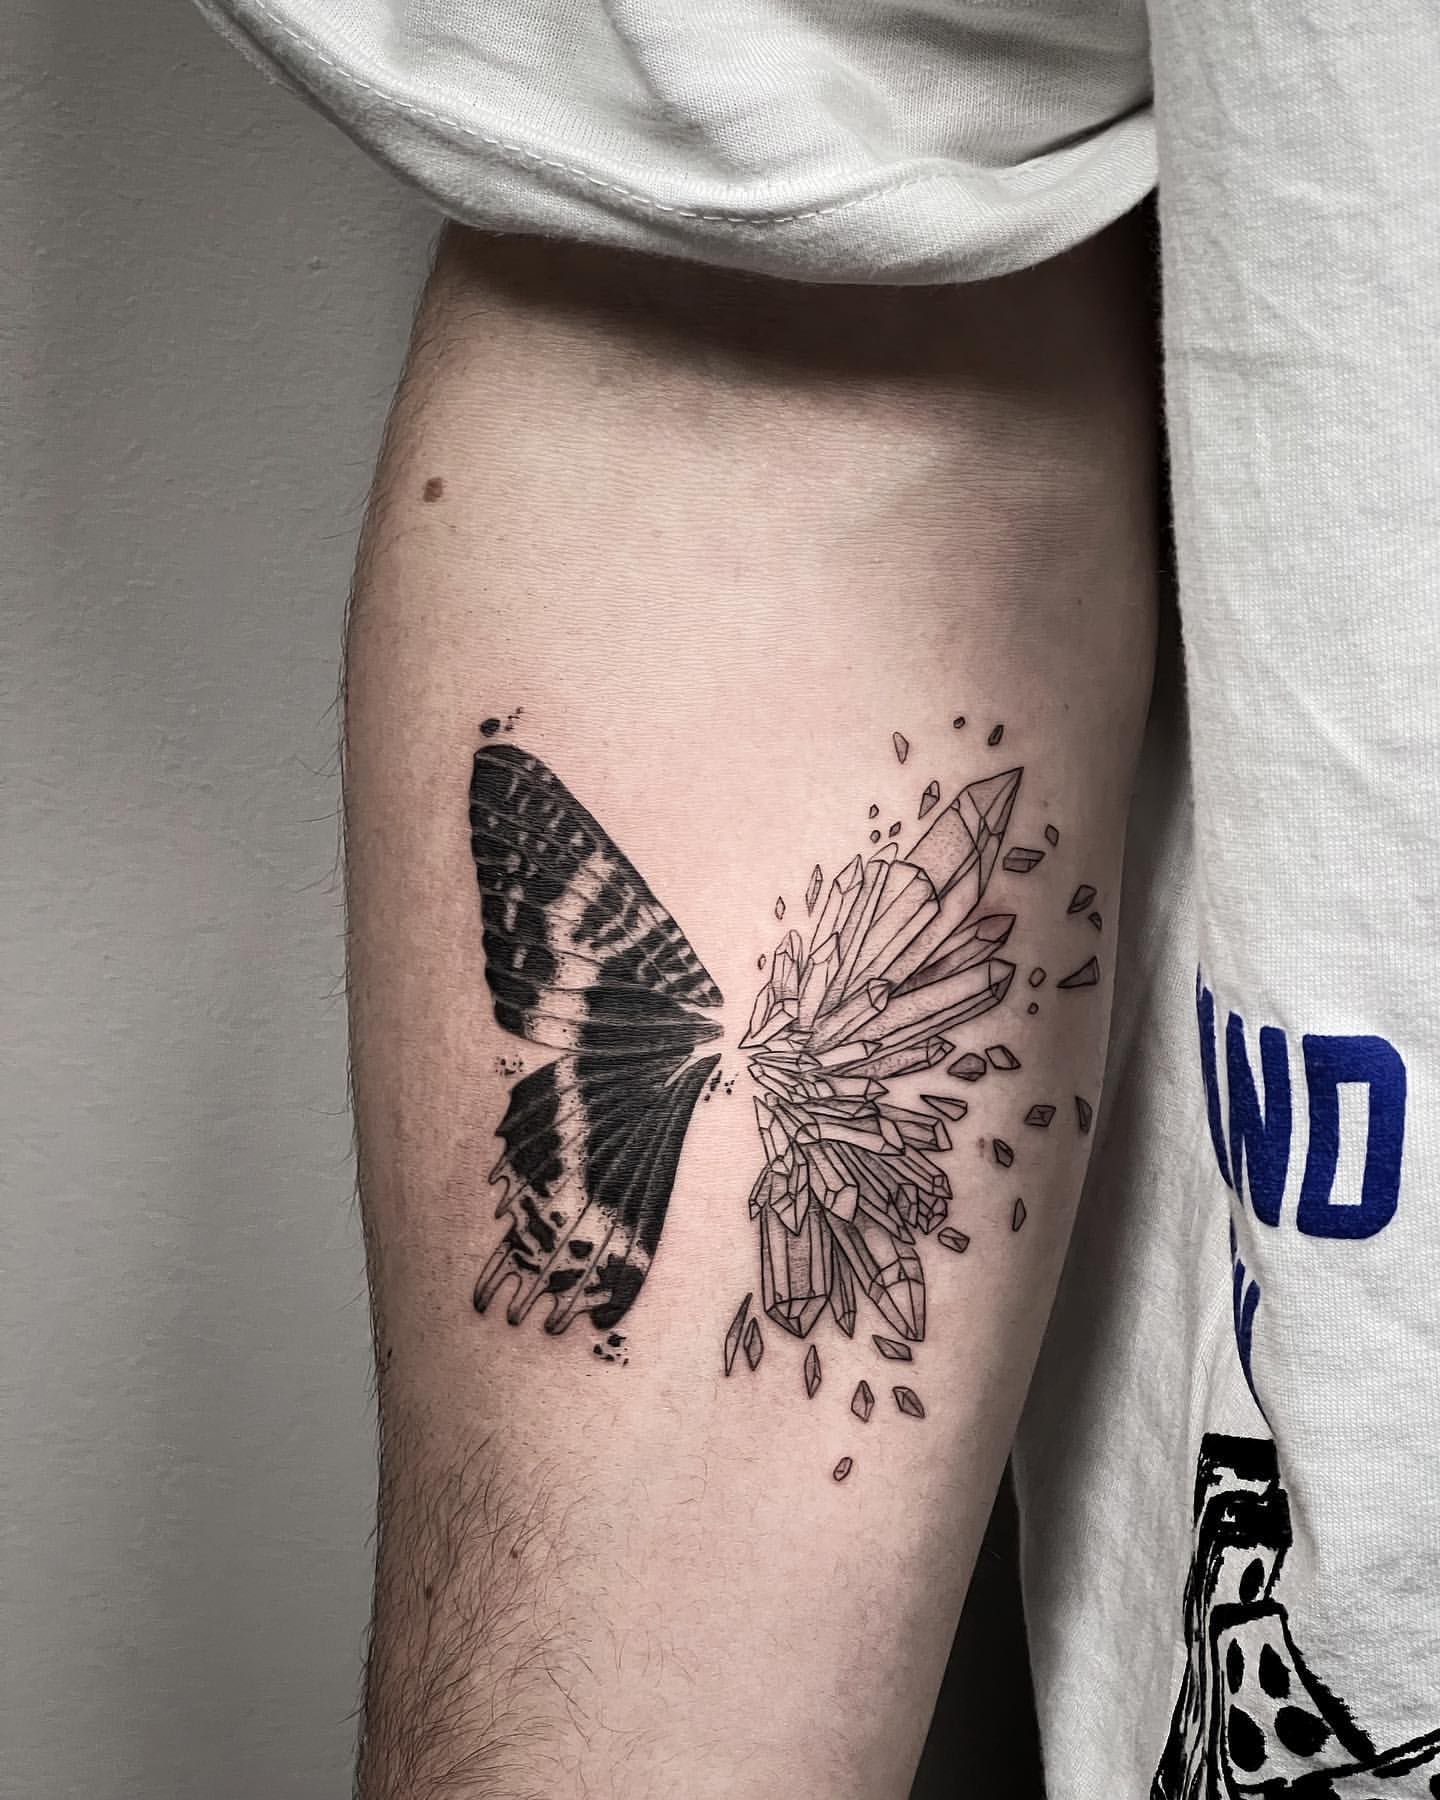 Butterfly tattoo ideas for guys